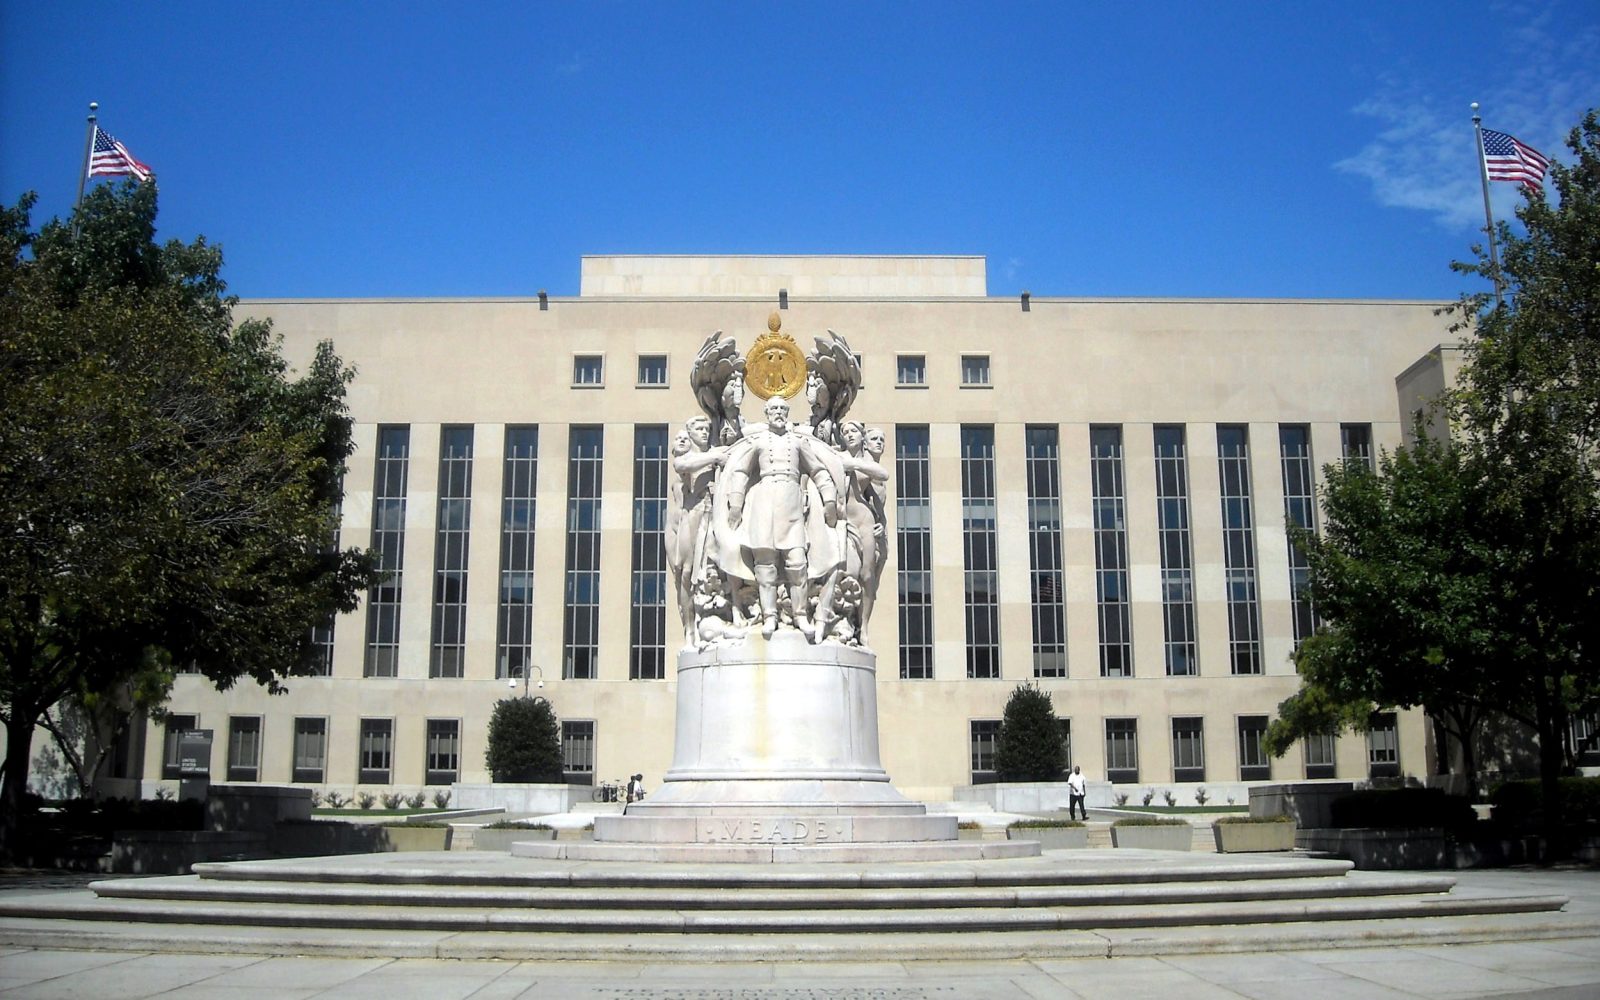 U.S. Court of Appeals for the D.C. Circuit